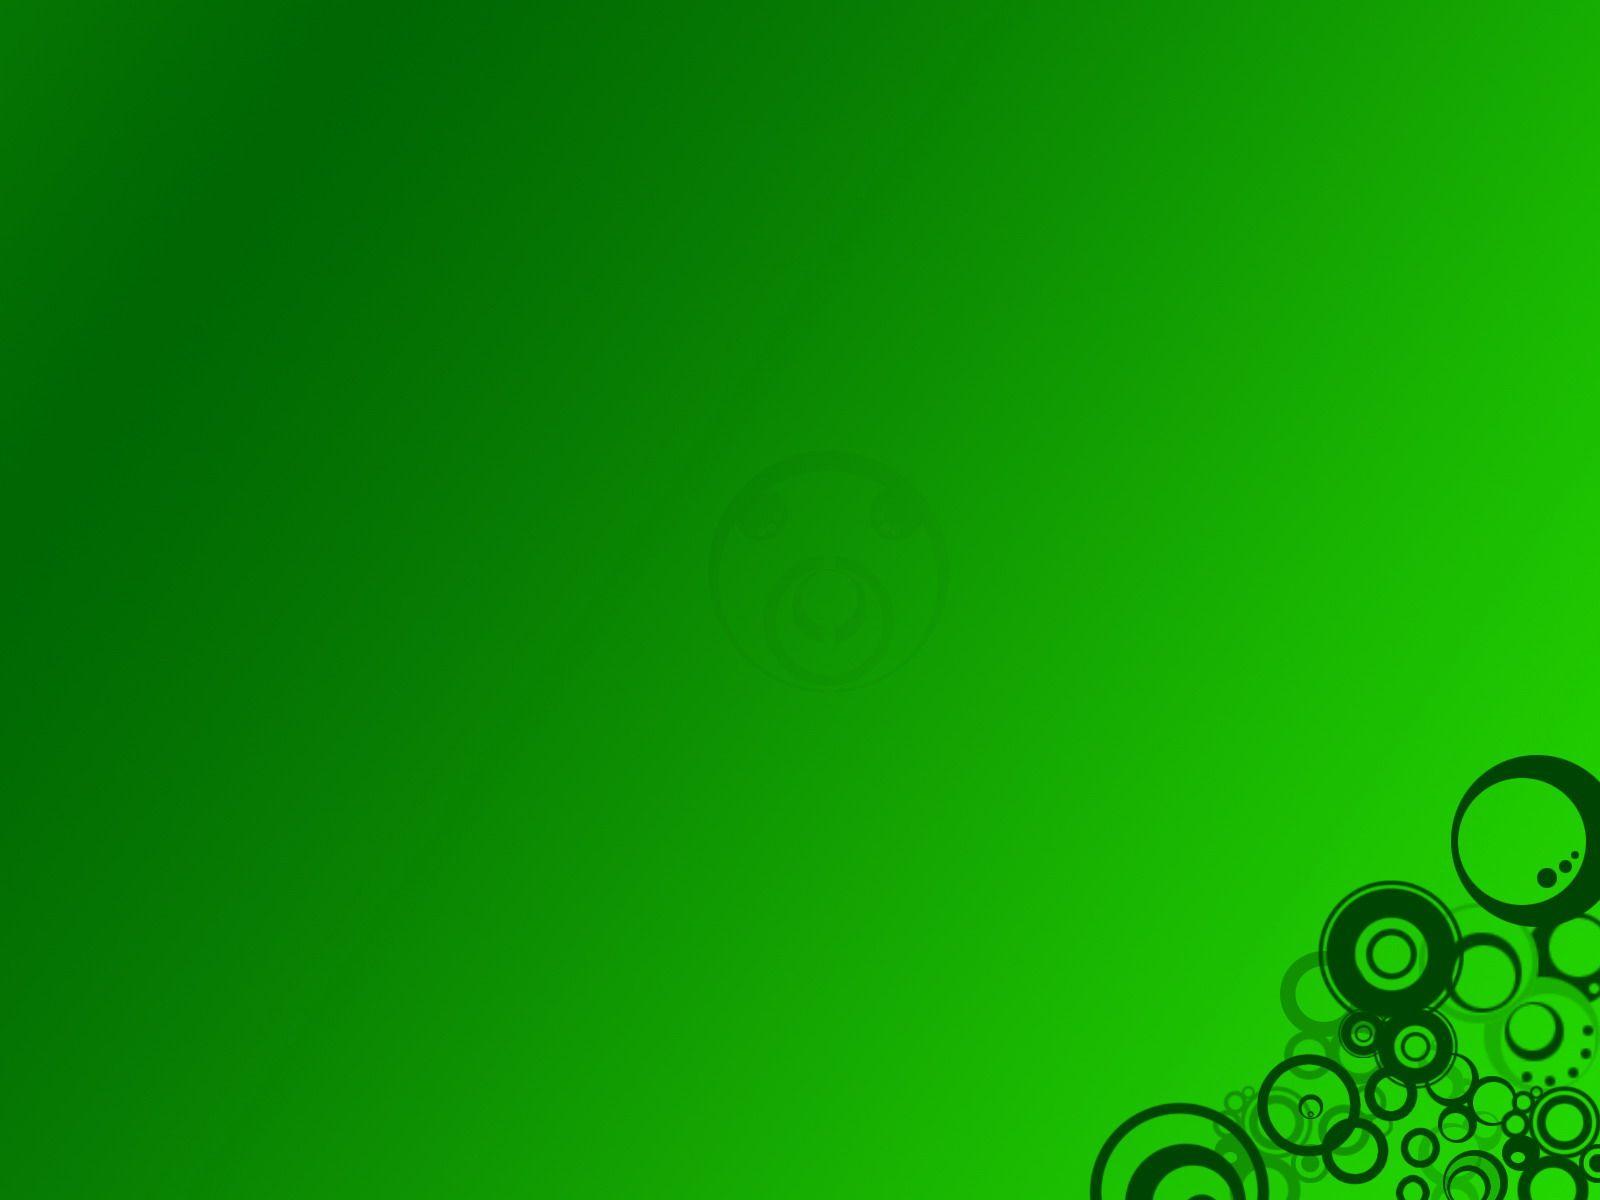 green wallpaper HD « Wallpaper Wide, HD (High Definition) and Mobile